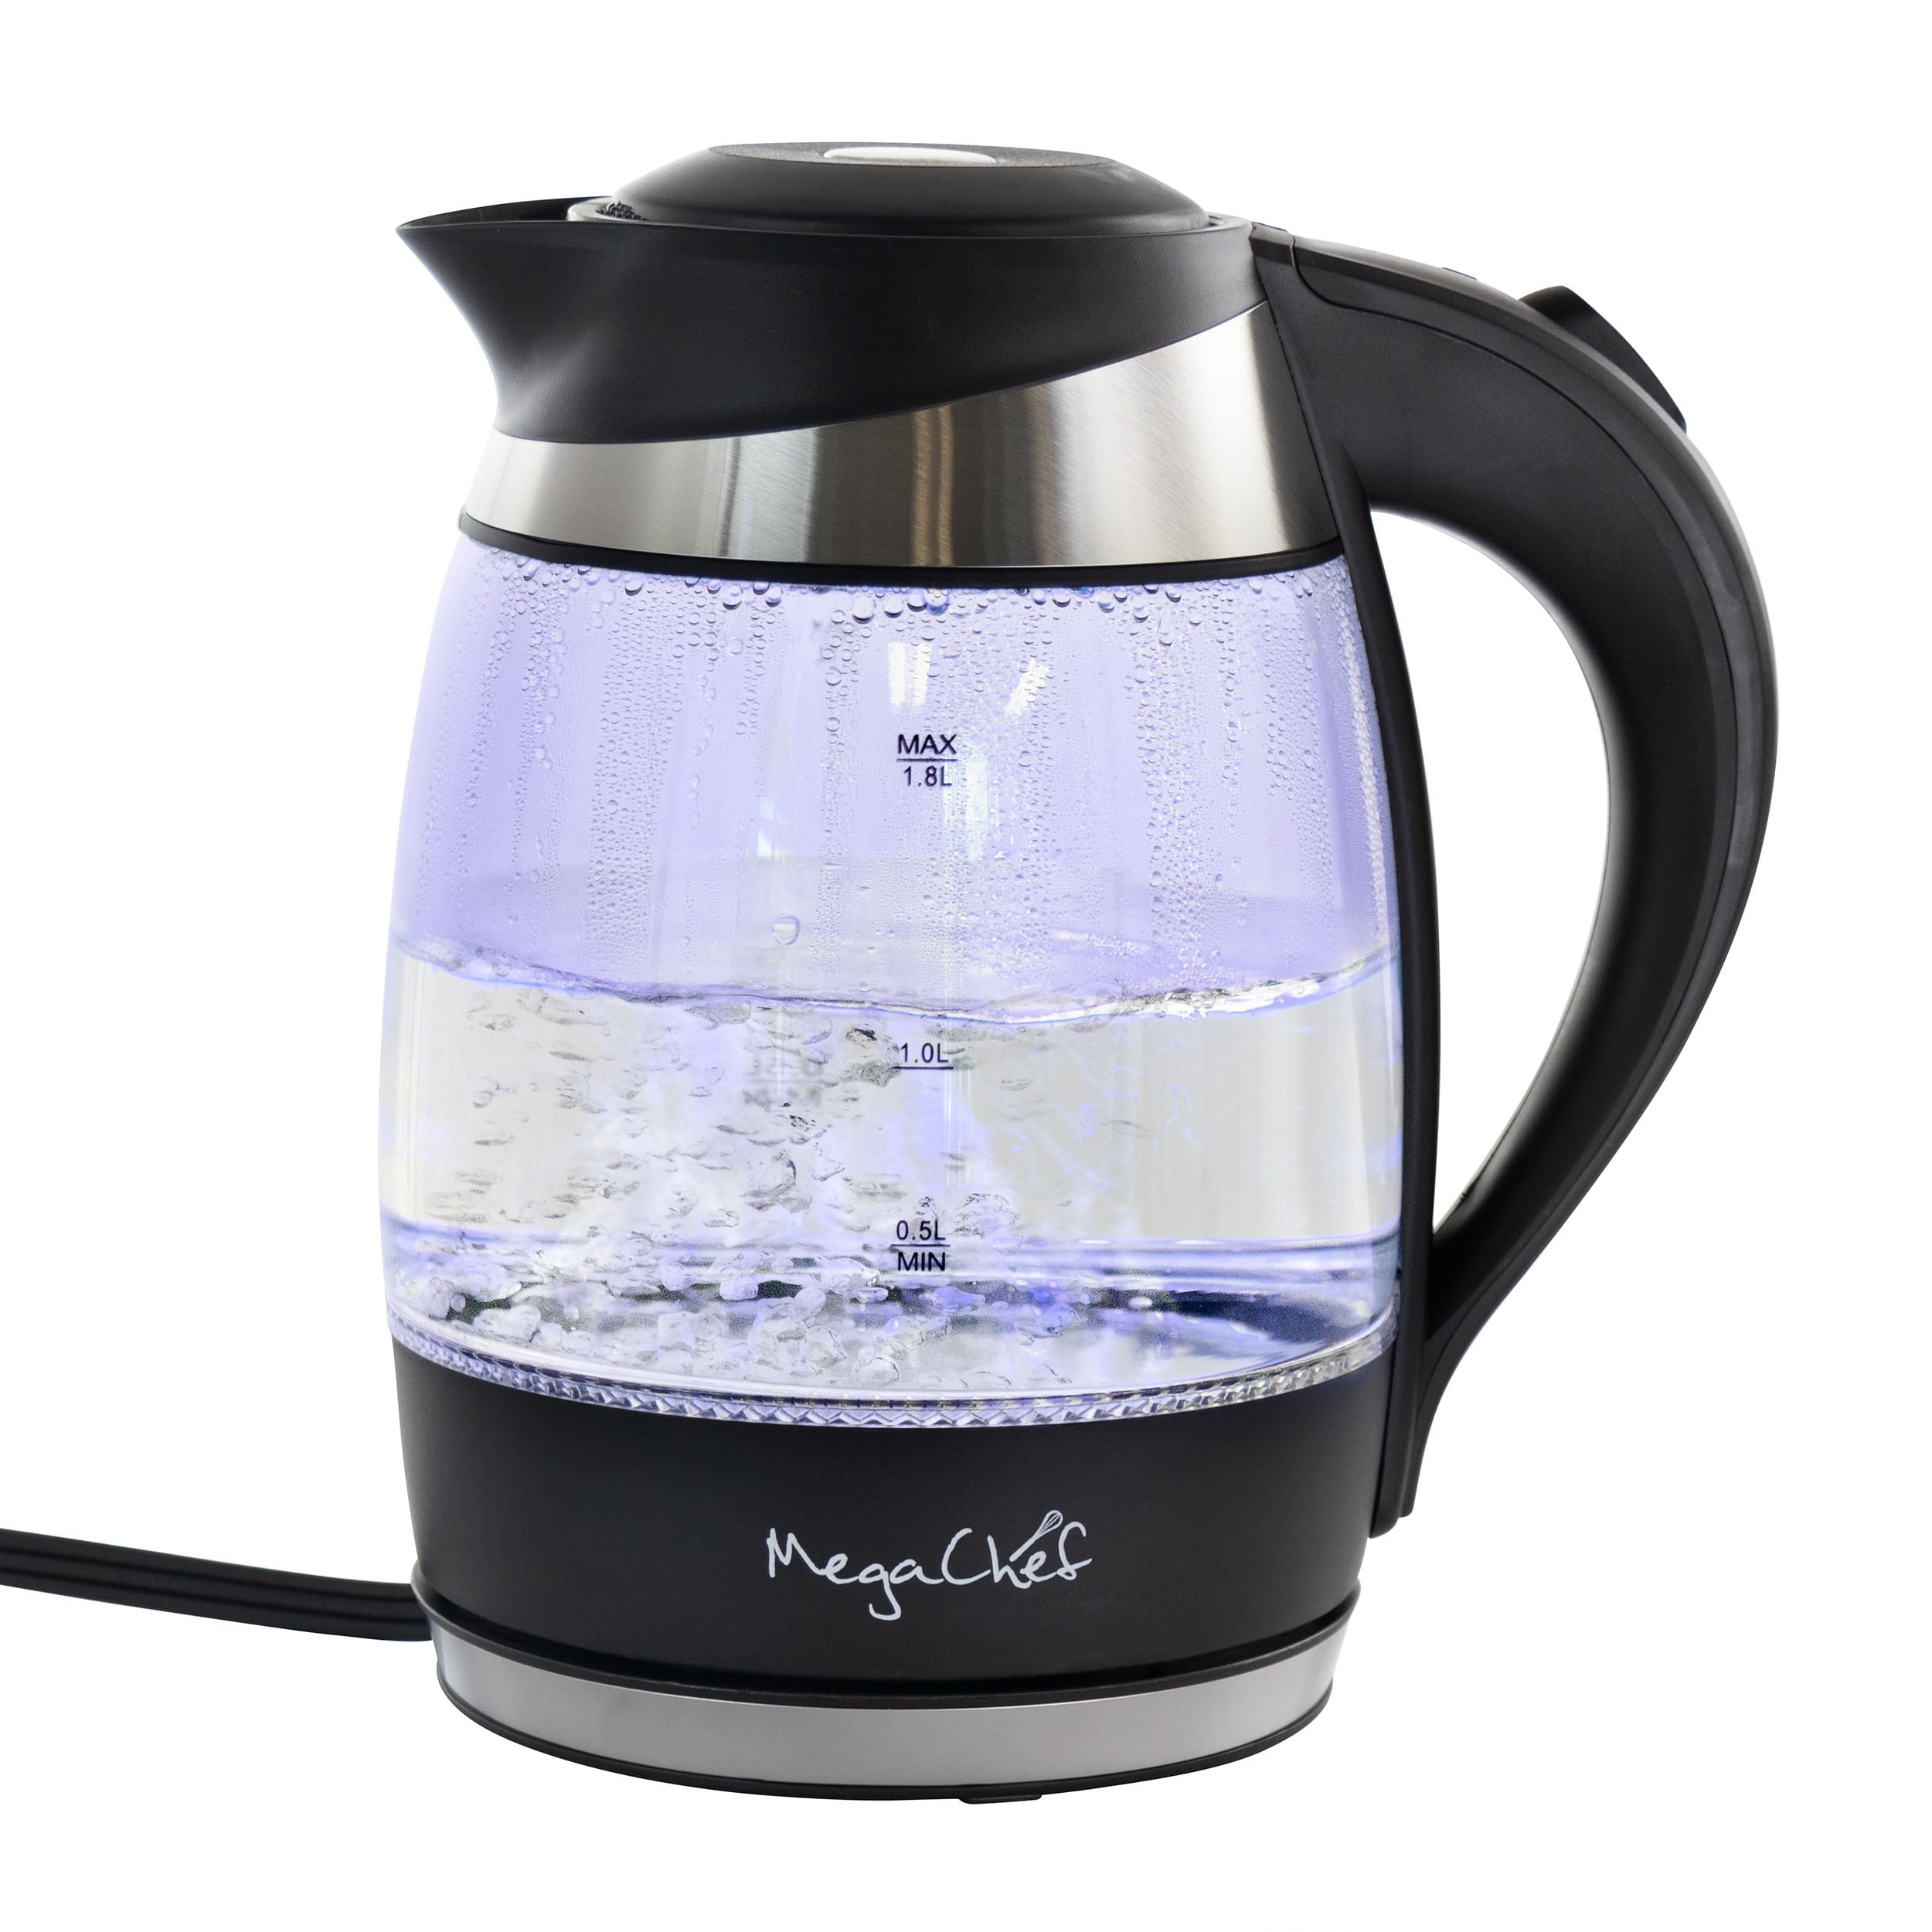 https://ak1.ostkcdn.com/images/products/is/images/direct/52dc27d4efaaead4fa737e317da7f309b9cf8227/MegaChef-1.8Lt.-Glass-and-Stainless-Steel-Electric-Tea-Kettle.jpg